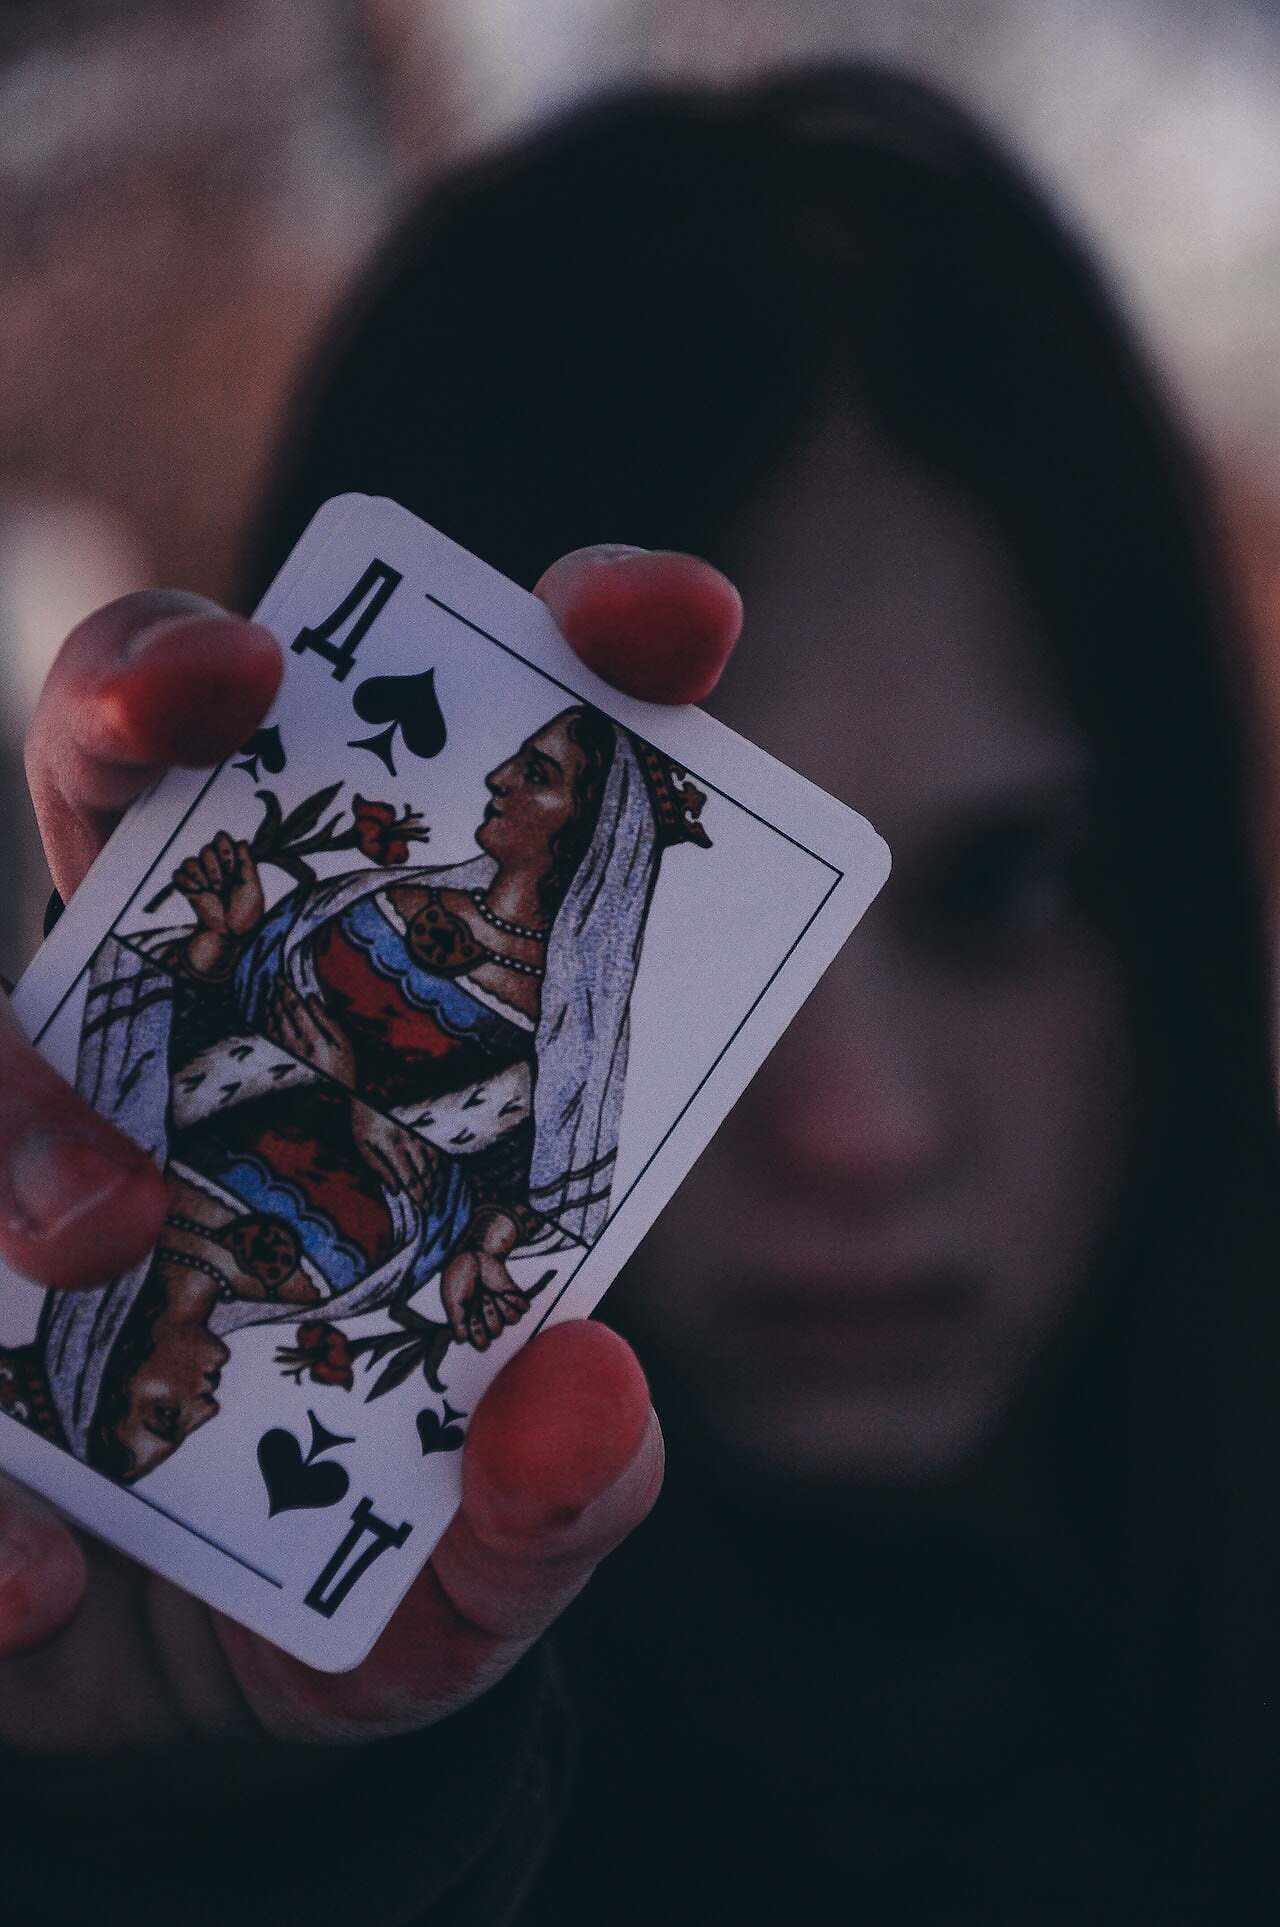 Drama Queen Photo by Andrei Kotovikov: https://www.pexels.com/photo/a-person-holding-a-card-11201021/